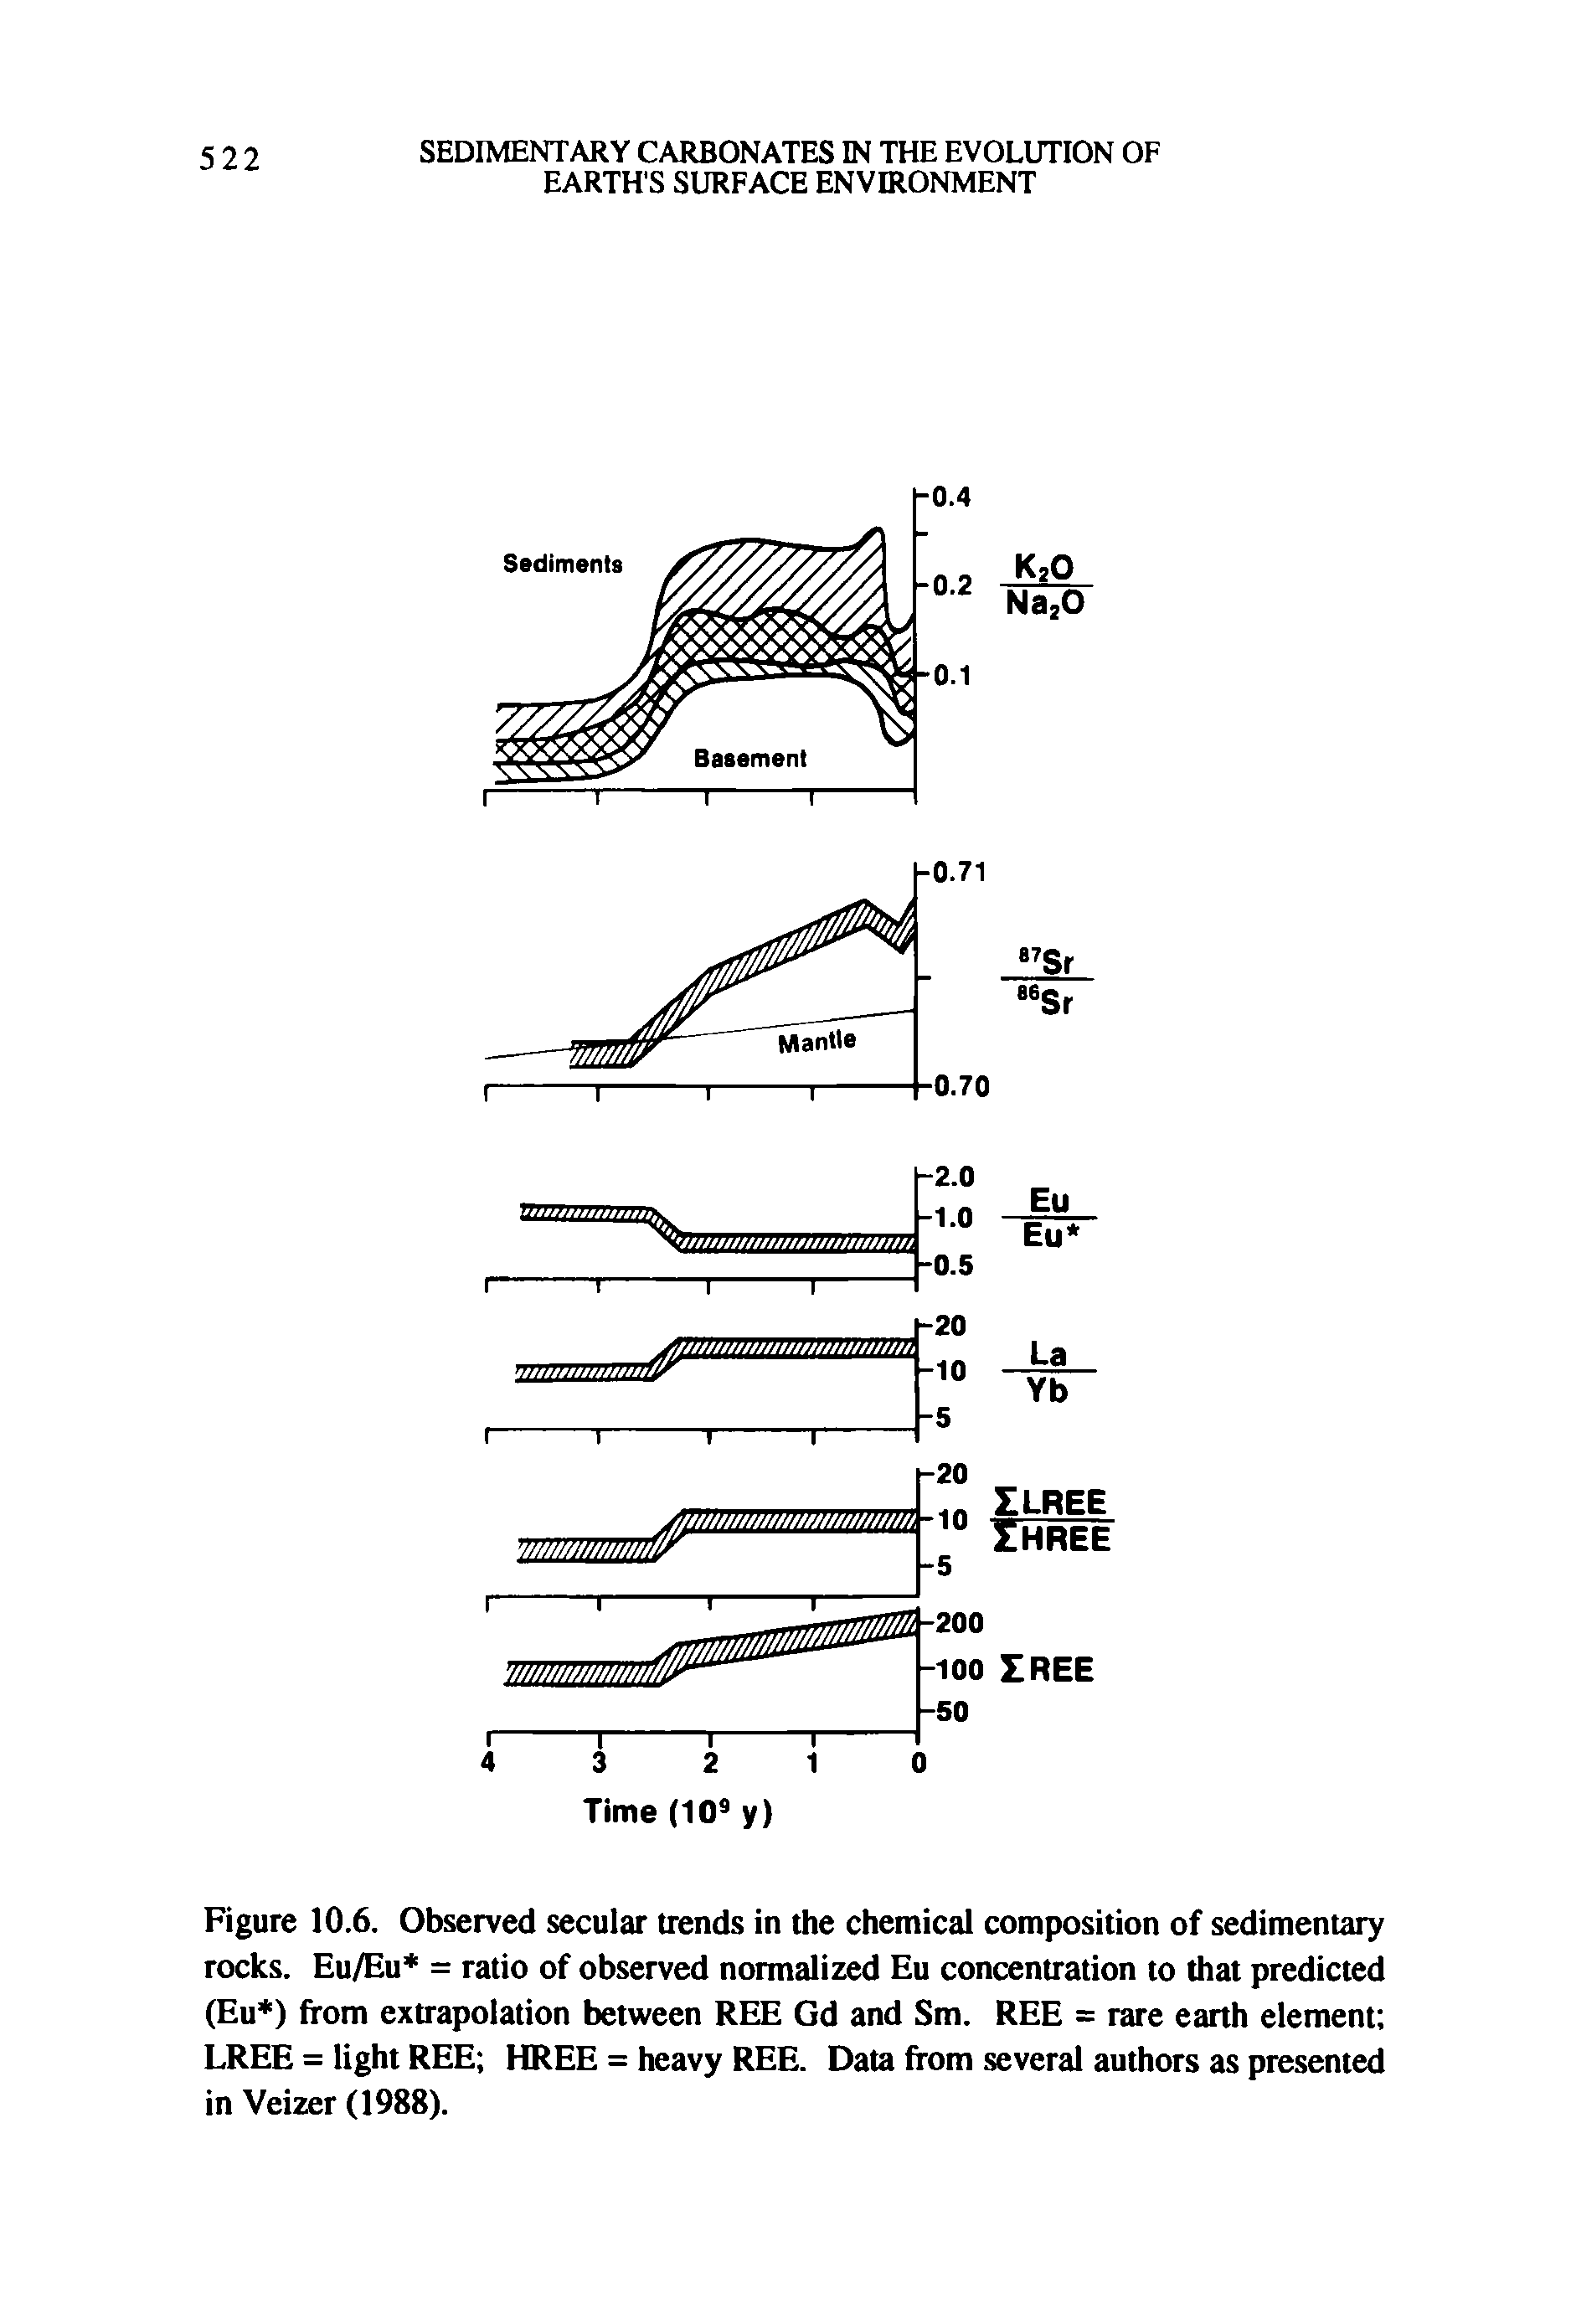 Figure 10.6. Observed secular trends in the chemical composition of sedimentary rocks. Eu/Eu = ratio of observed normalized Eu concentration to that predicted (Eu ) from extrapolation between REE Gd and Sm. REE = rare earth element LREE = light REE HREE = heavy REE. Data from several authors as presented in Veizer (1988).